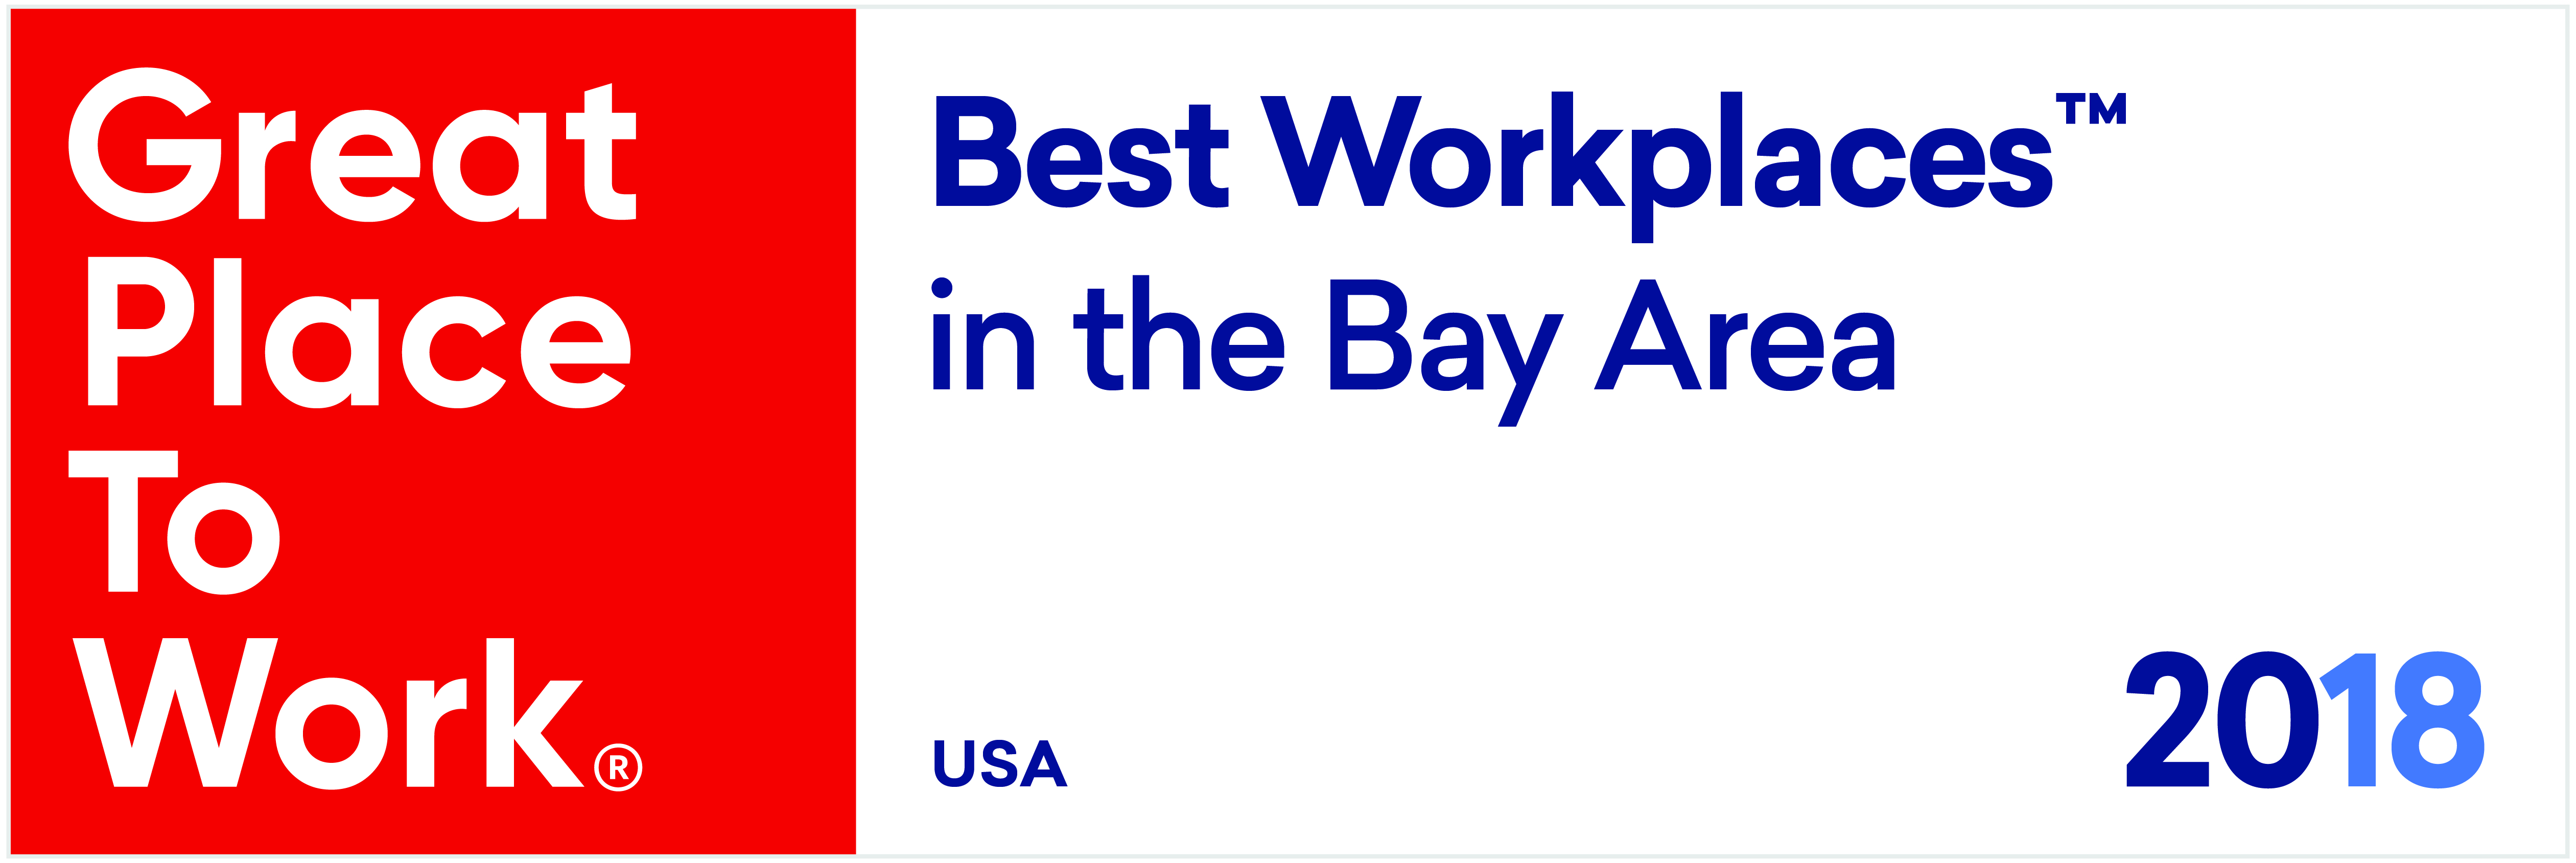 Arnold &amp; Porter Named to 2018 &apos;Best Workplaces in the Bay Area&apos; List by Fortune and Great Place to Work